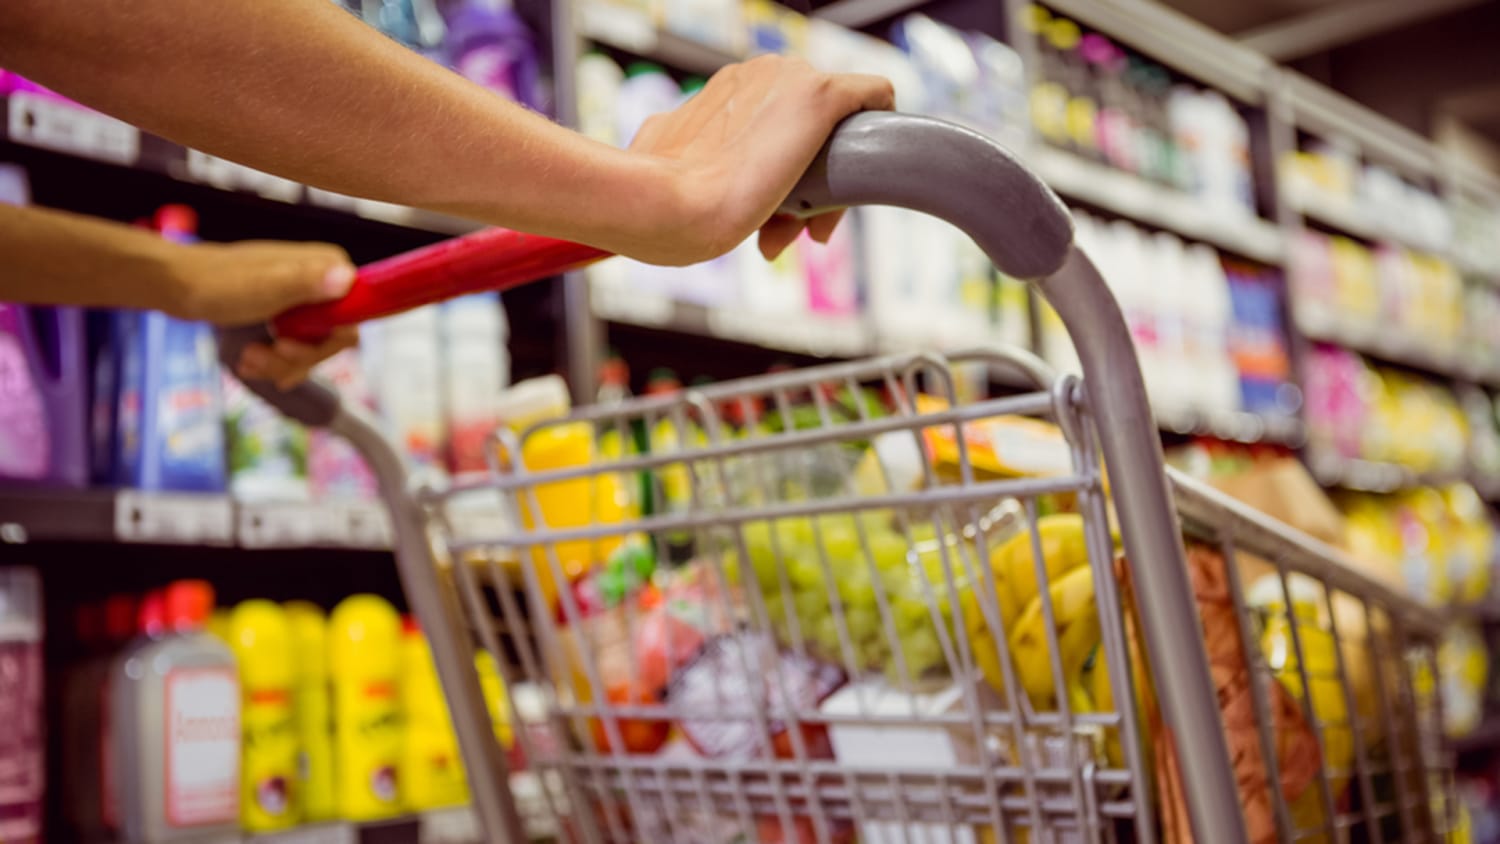 Retailers, distributors respond to new challenges during pandemic |  Supermarket News